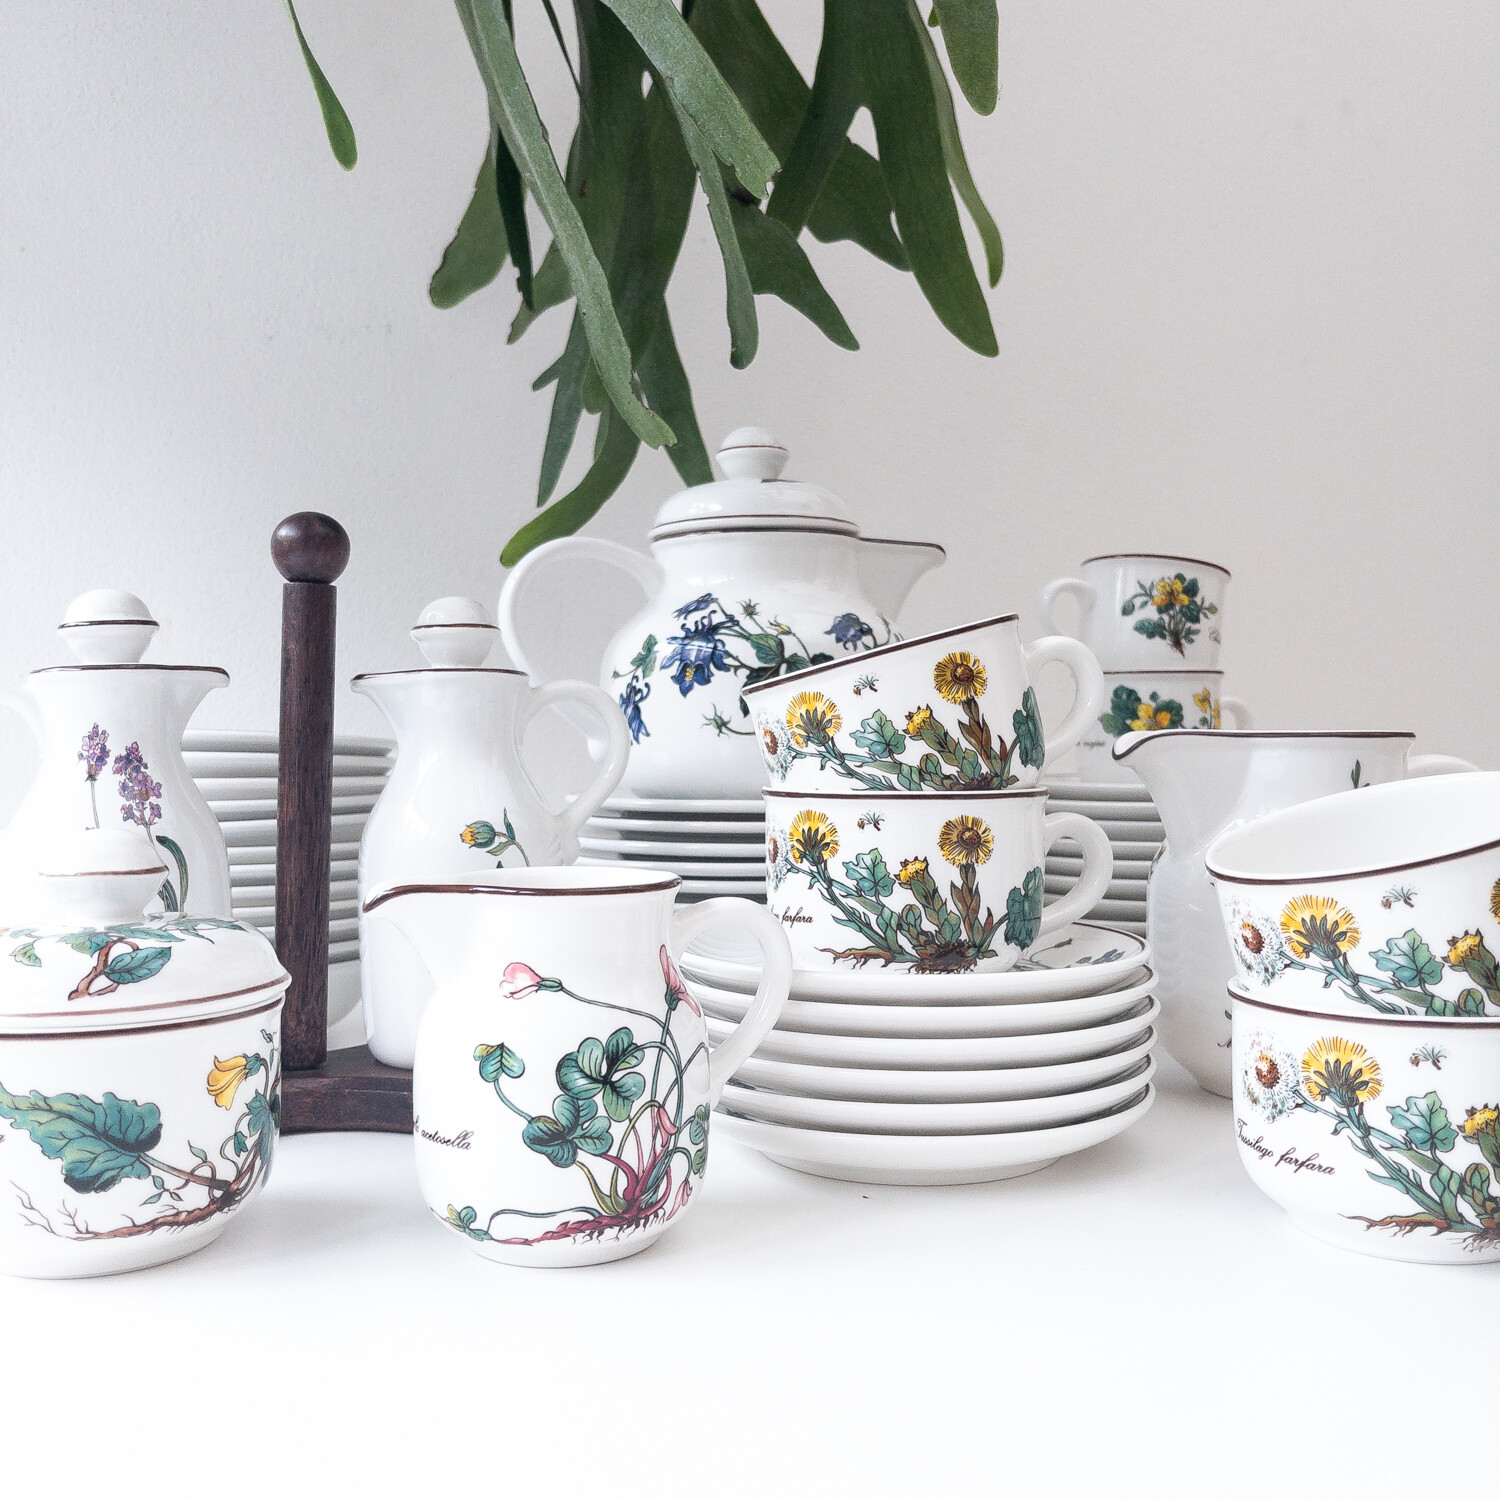 Botanica series porcelain service by Villeroy &amp; Boch from the 1990s